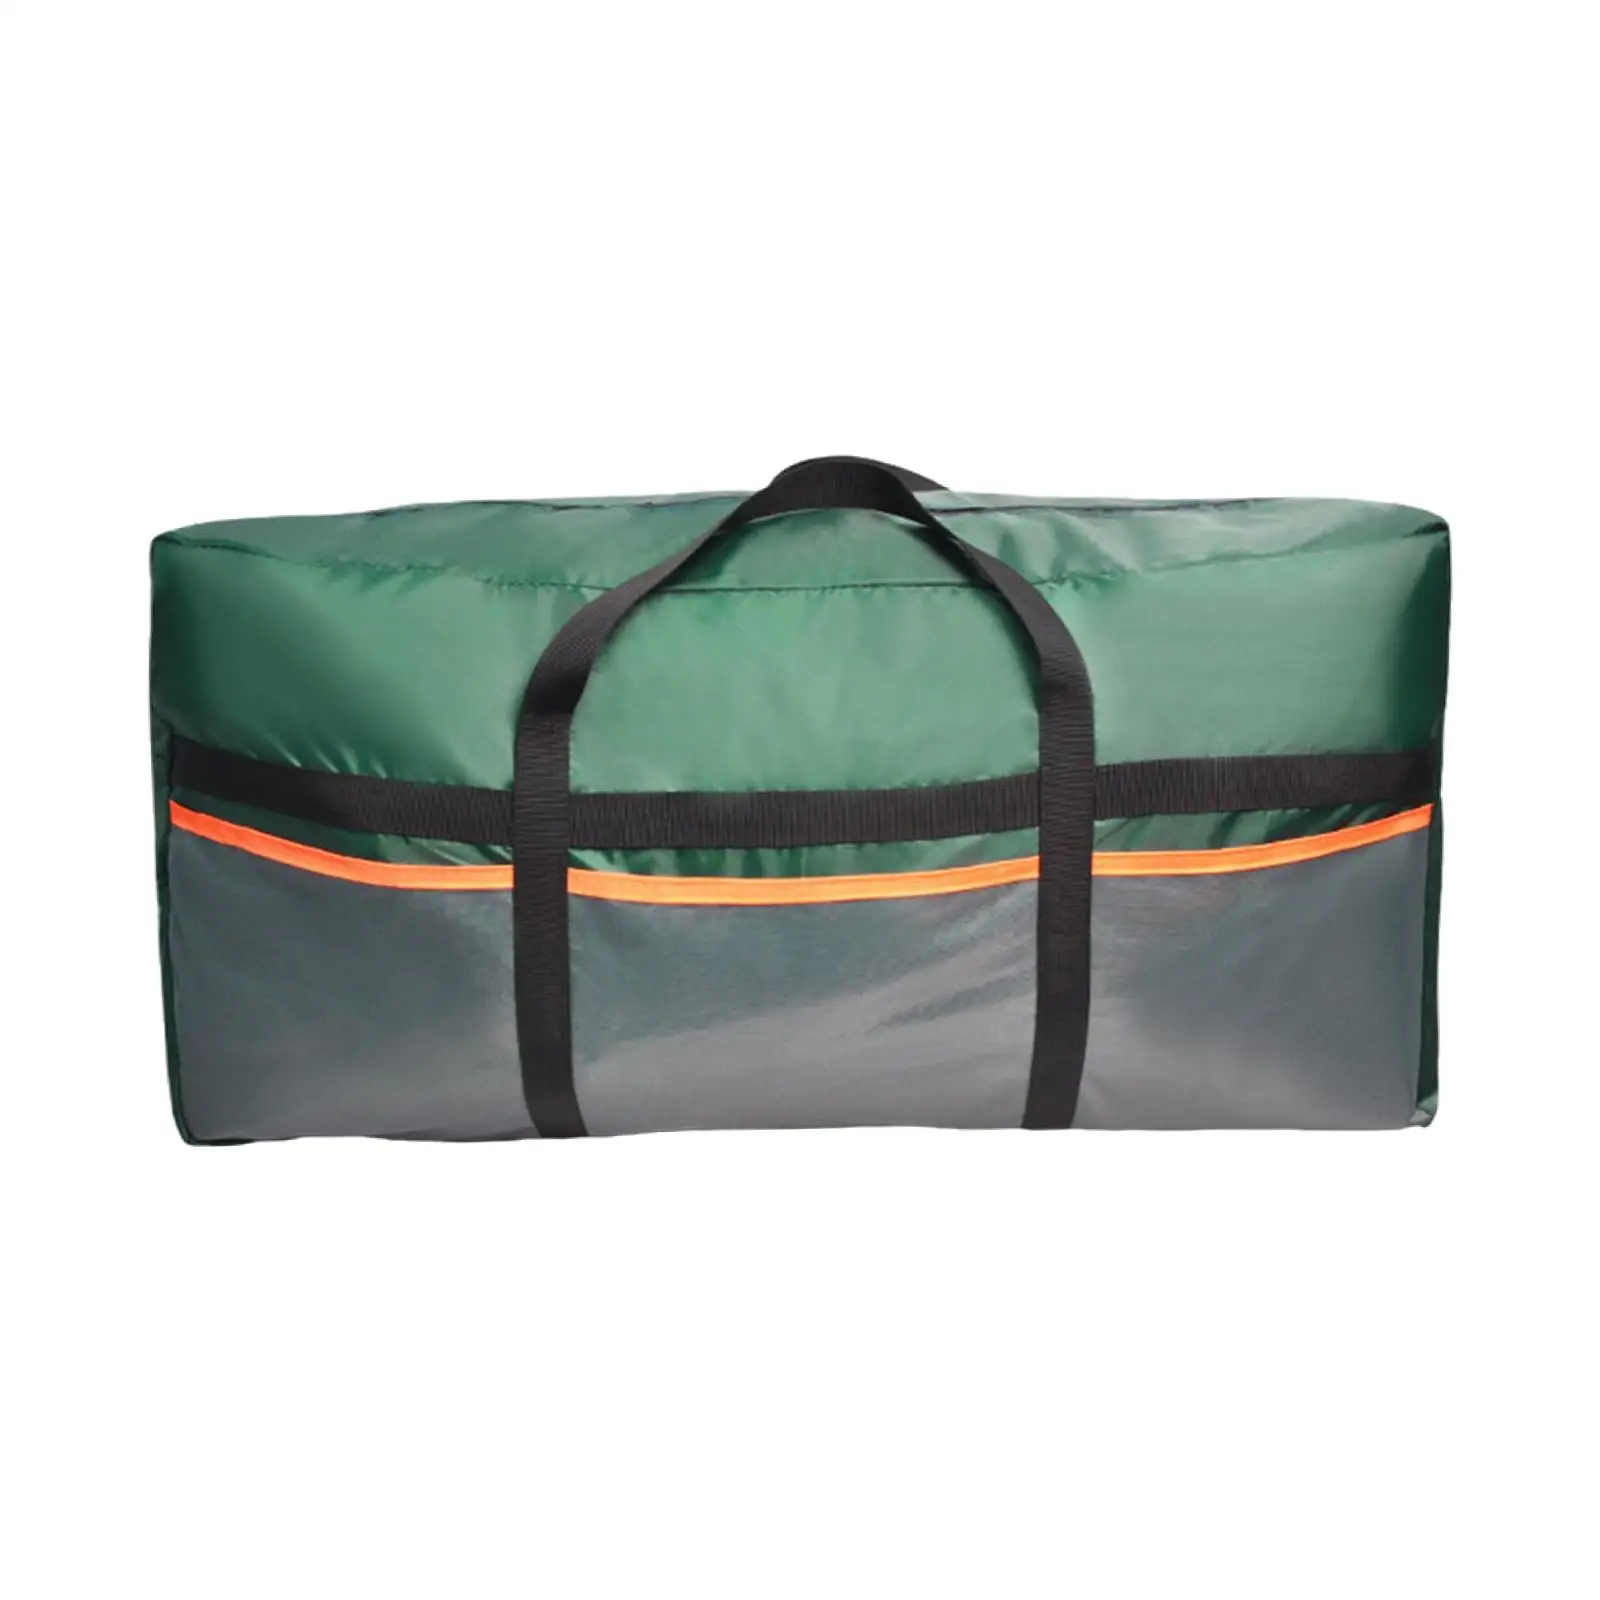 Tent Storage Bag Waterproof Carrier Container Reusable Pouch Zippered Duffel Bag for Travel Picnic Gardening Backpacking Outdoor